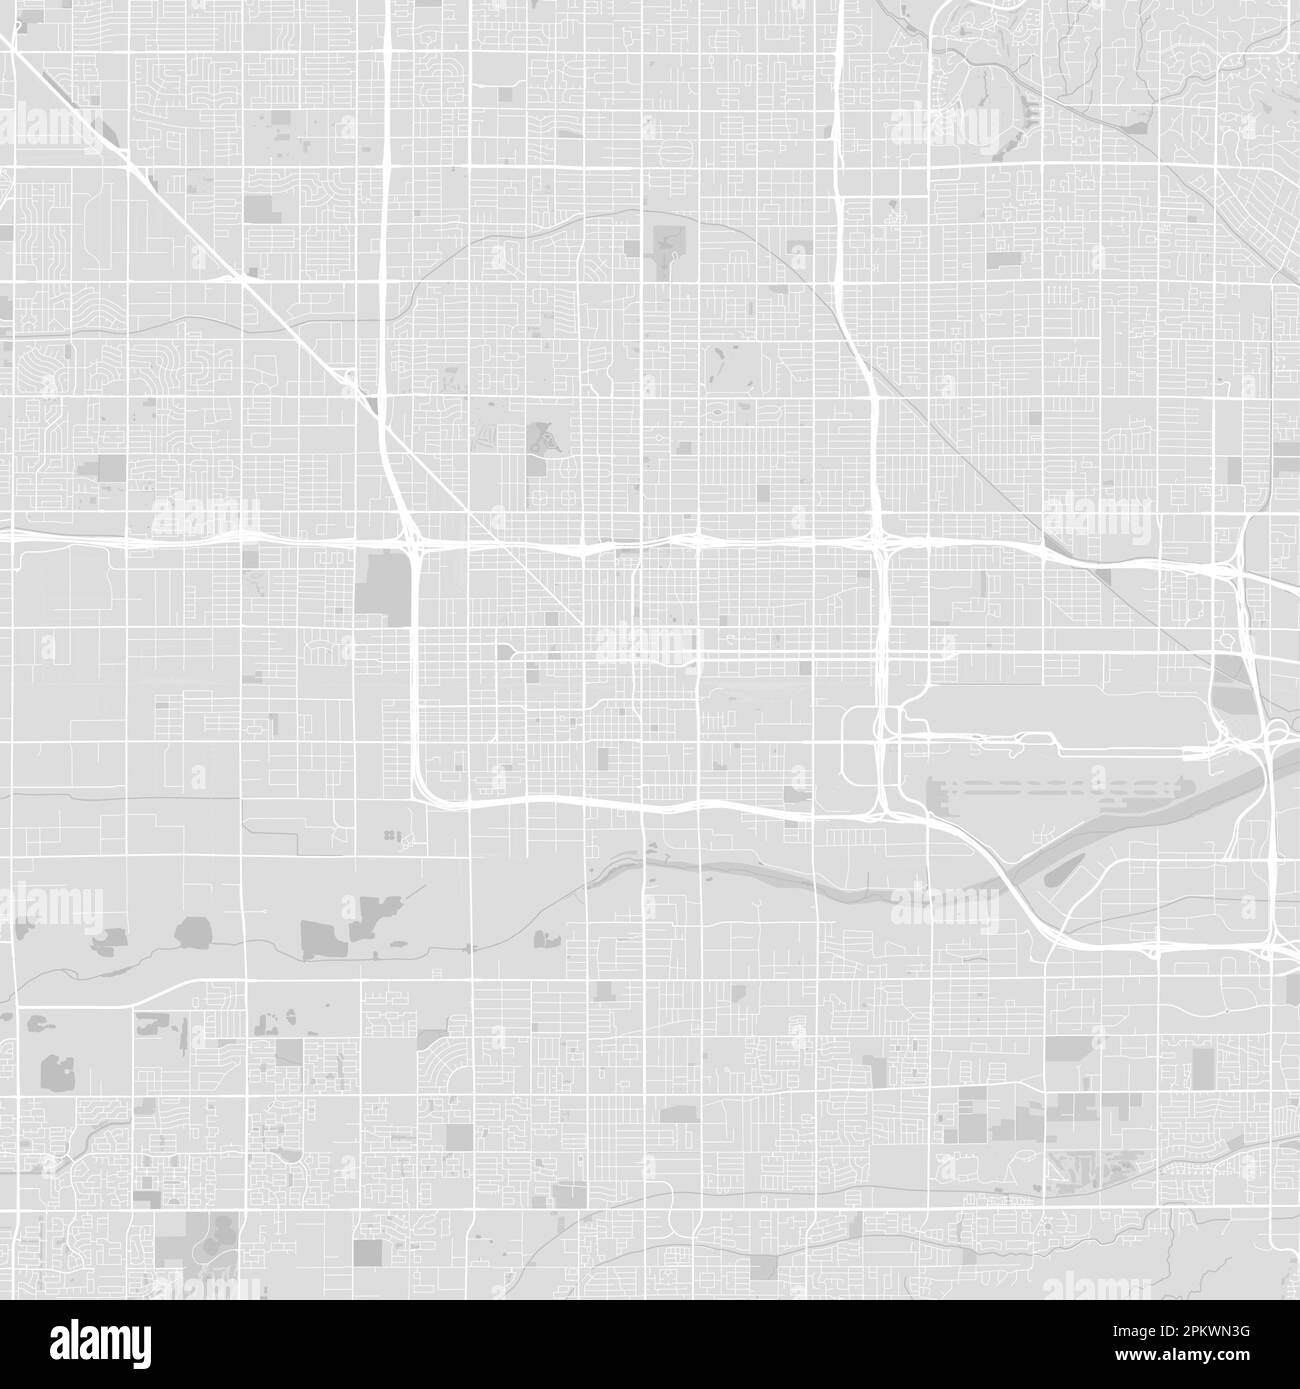 Urban city vector map of Phoenix, Arizona. Vector illustration, Phoenix map grayscale black and white art poster. Road map image with roads, metropoli Stock Vector